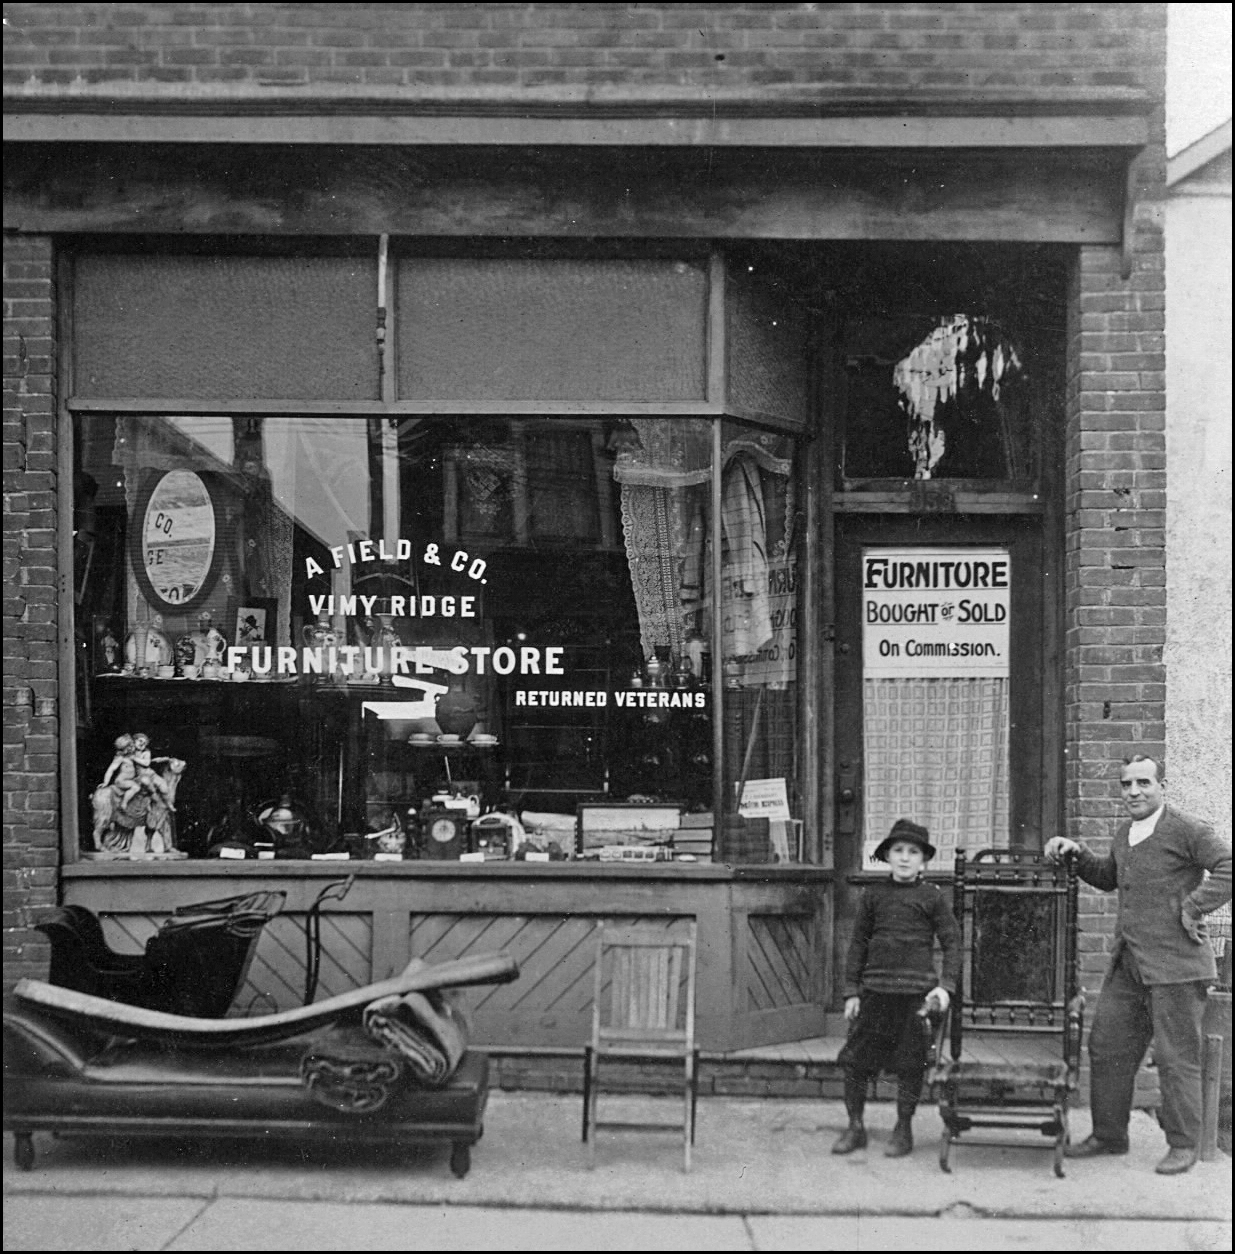 Miscellany Toronto Photographs: Then and Now | Page 953 | UrbanToronto